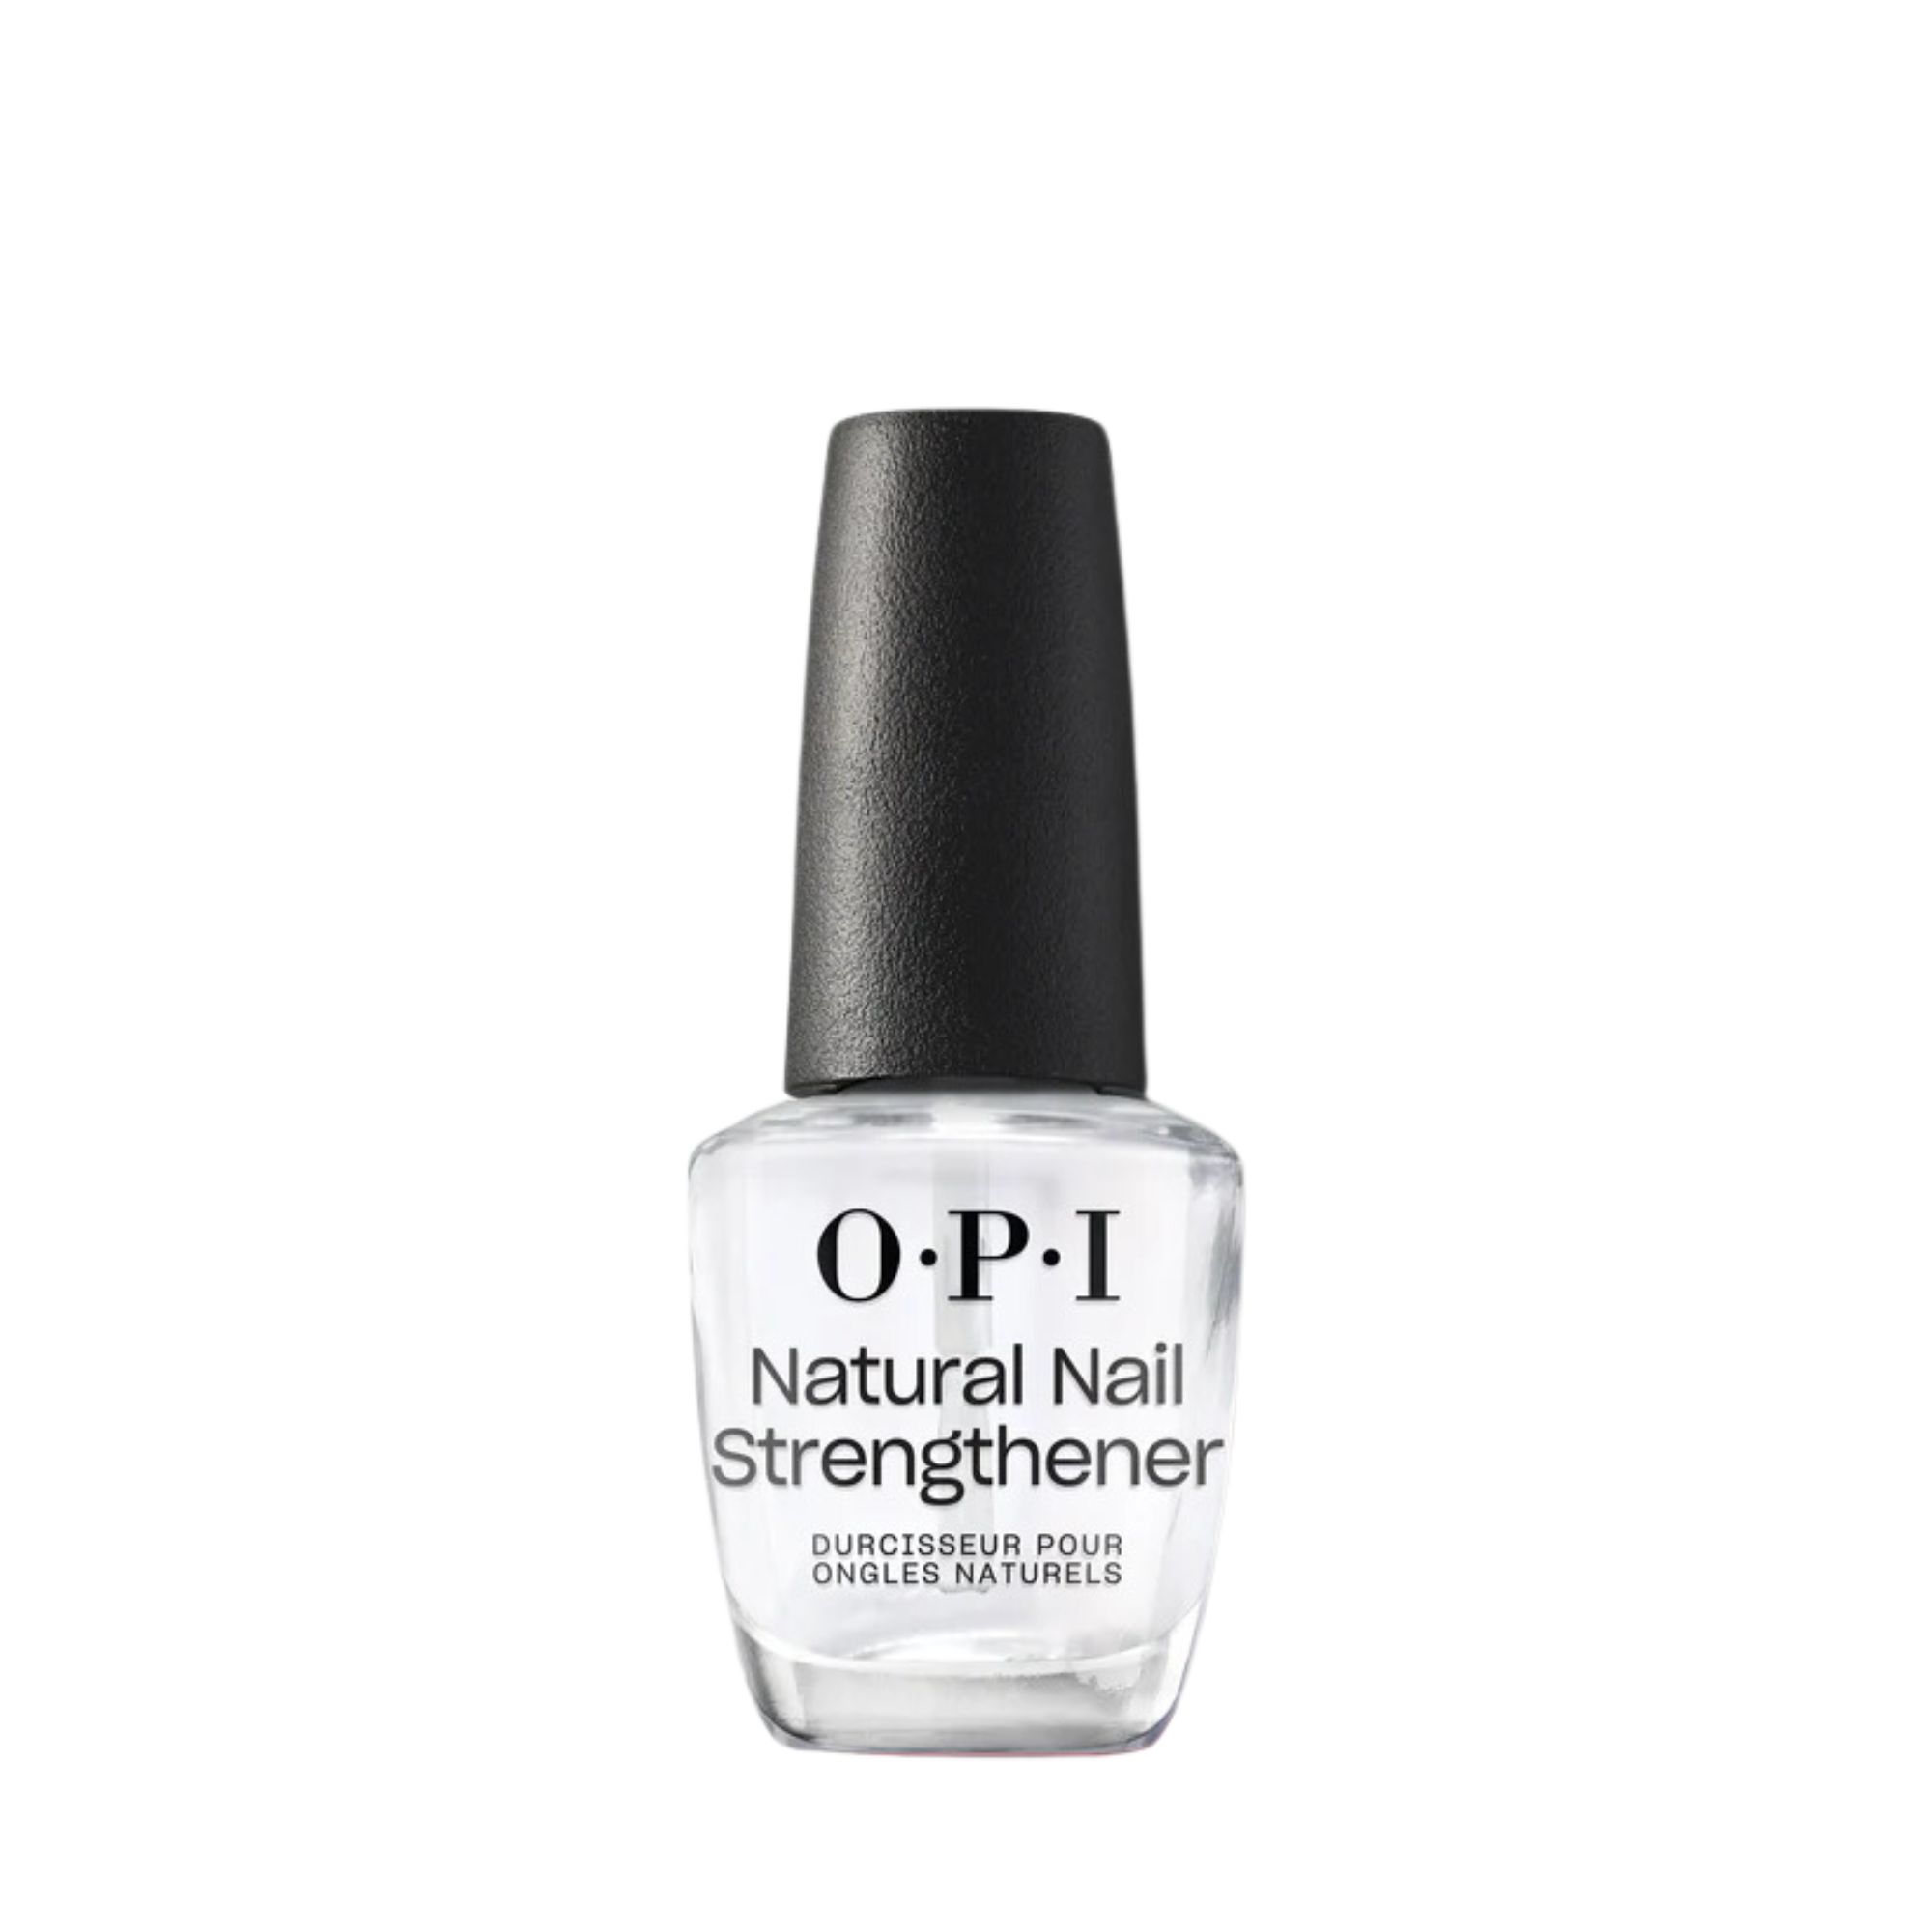 OPI Nail Envy Pink to Envy 15ml :: OPI :: *SHOP BY BRAND :: Pharmacy Direct  - NZ's favourite online pharmacy